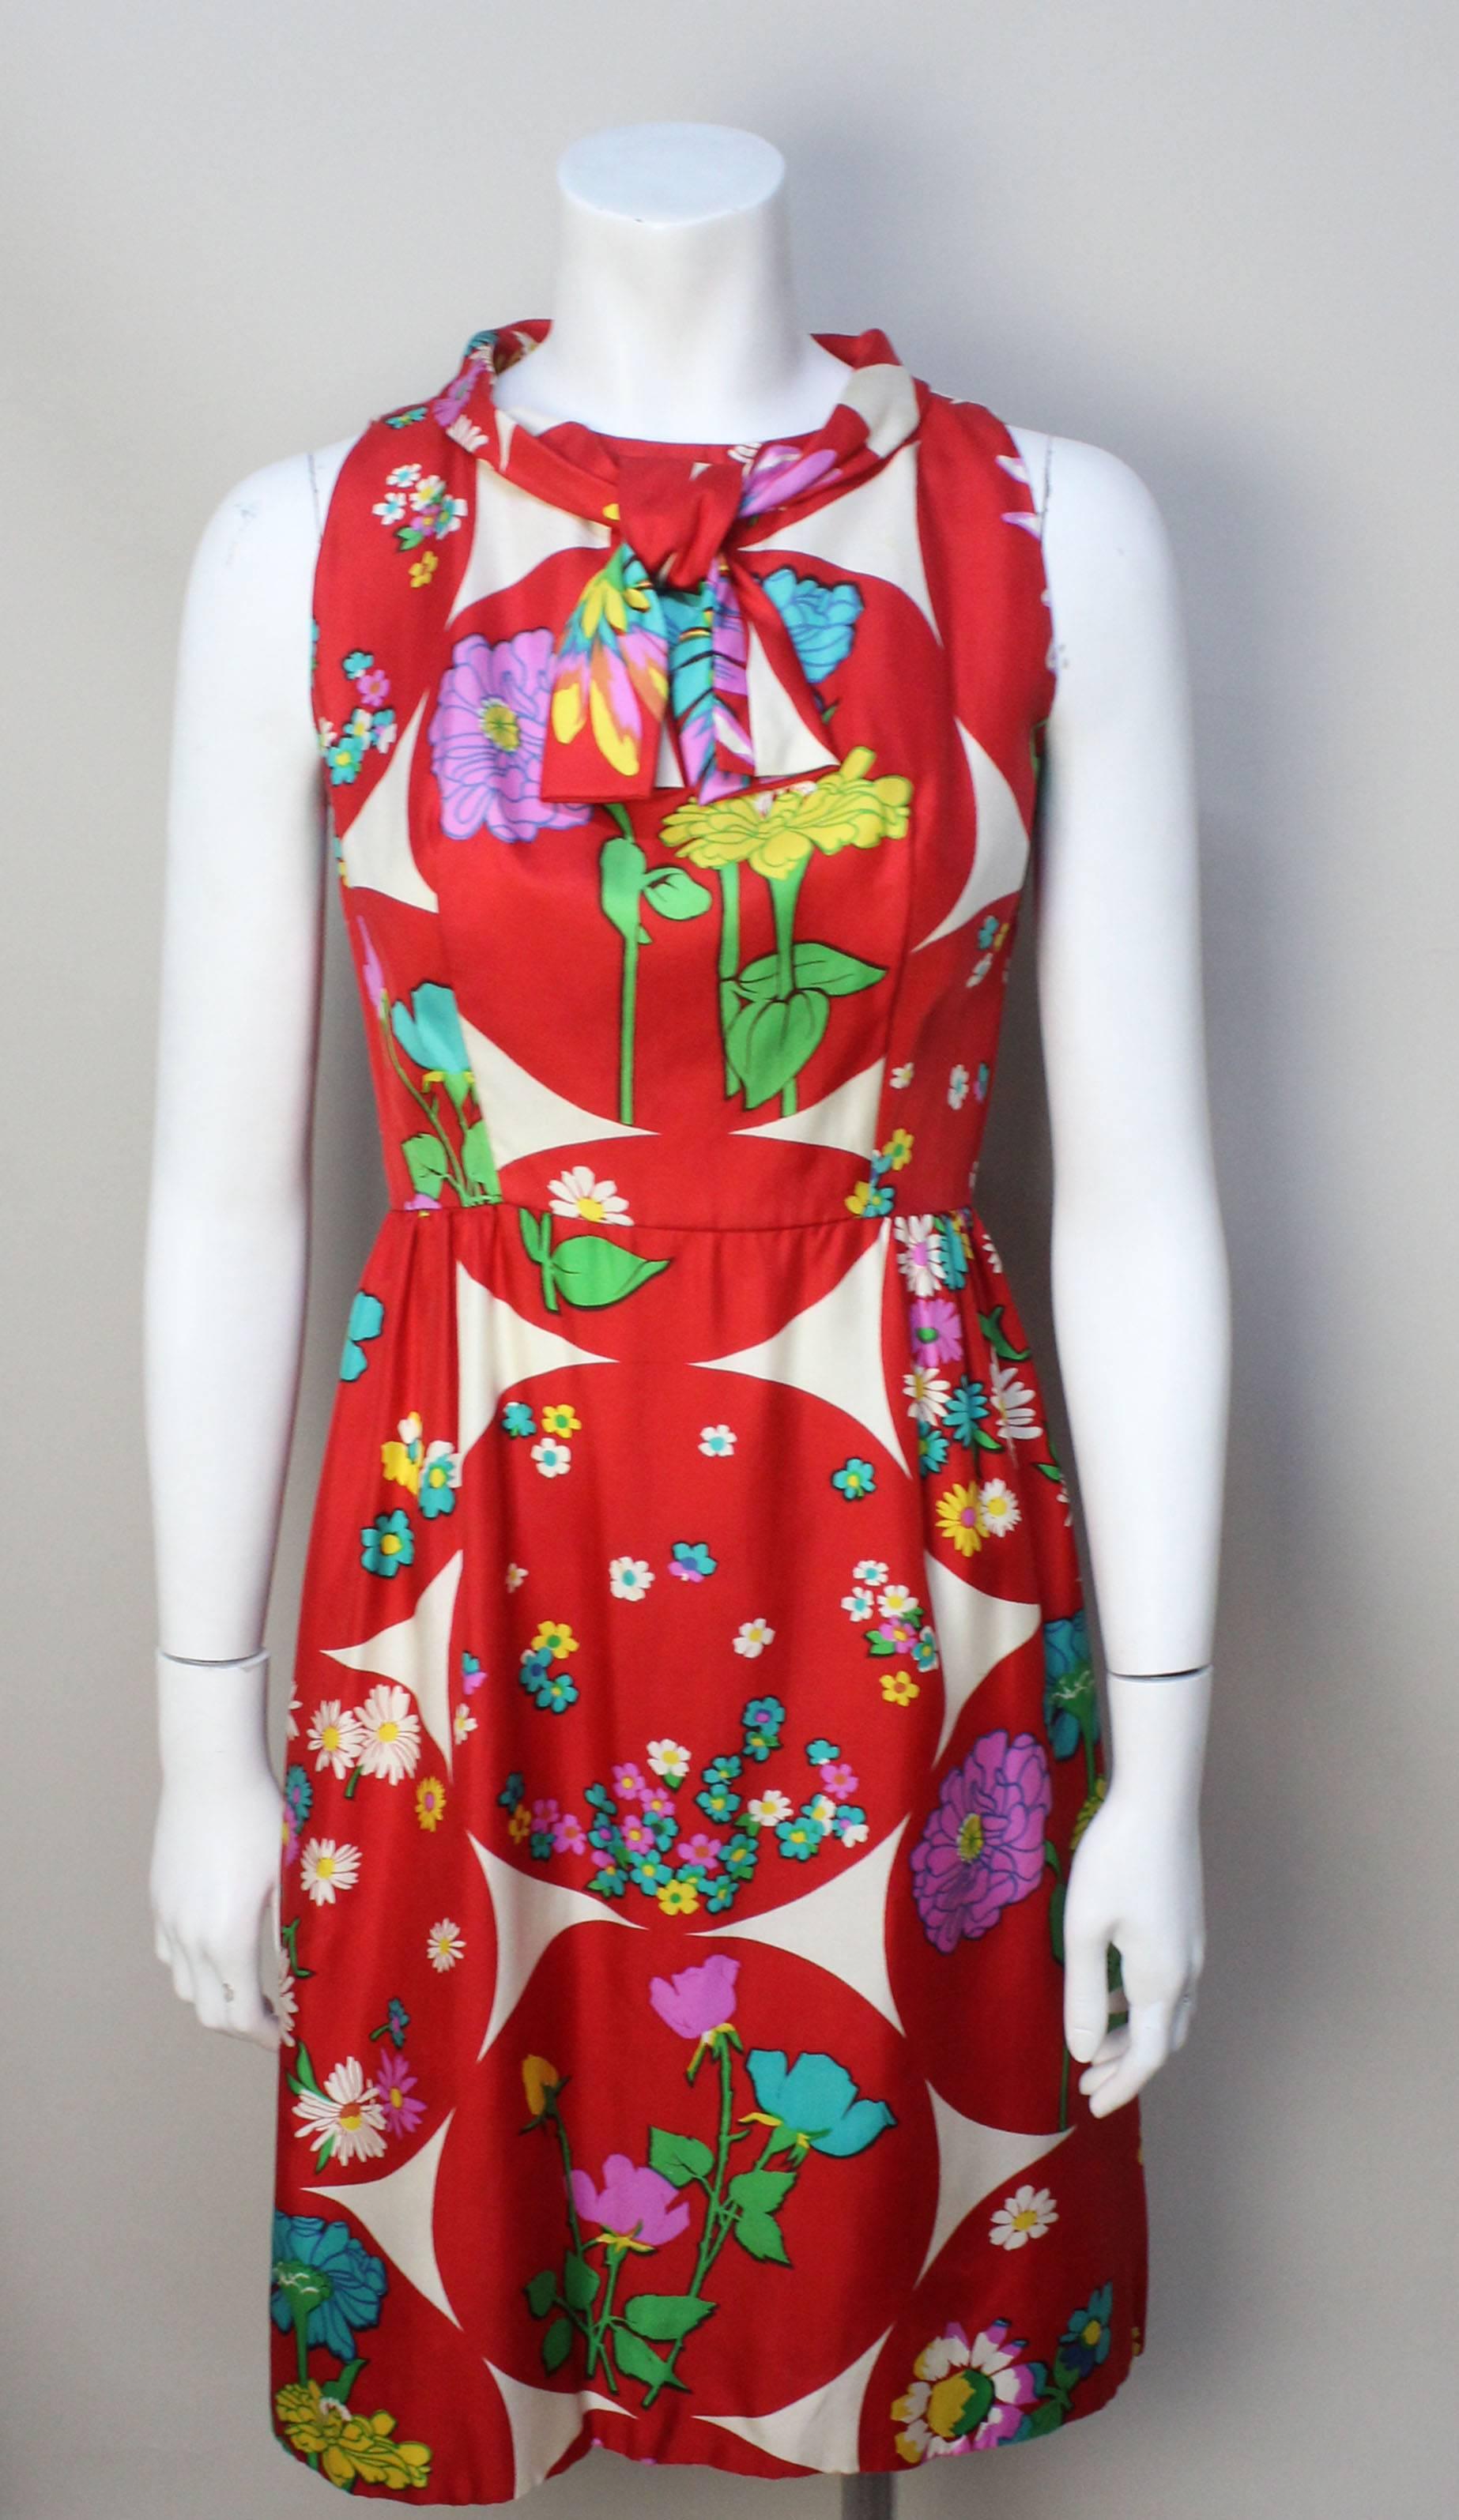 Manila born Lito Manalang was a dress designer in the 1960's for a firm named British Moderns. He was known for his simple, elegant designs based on European couture. Fabrics were his forte and this beautiful silk rayon floral is a perfect example.